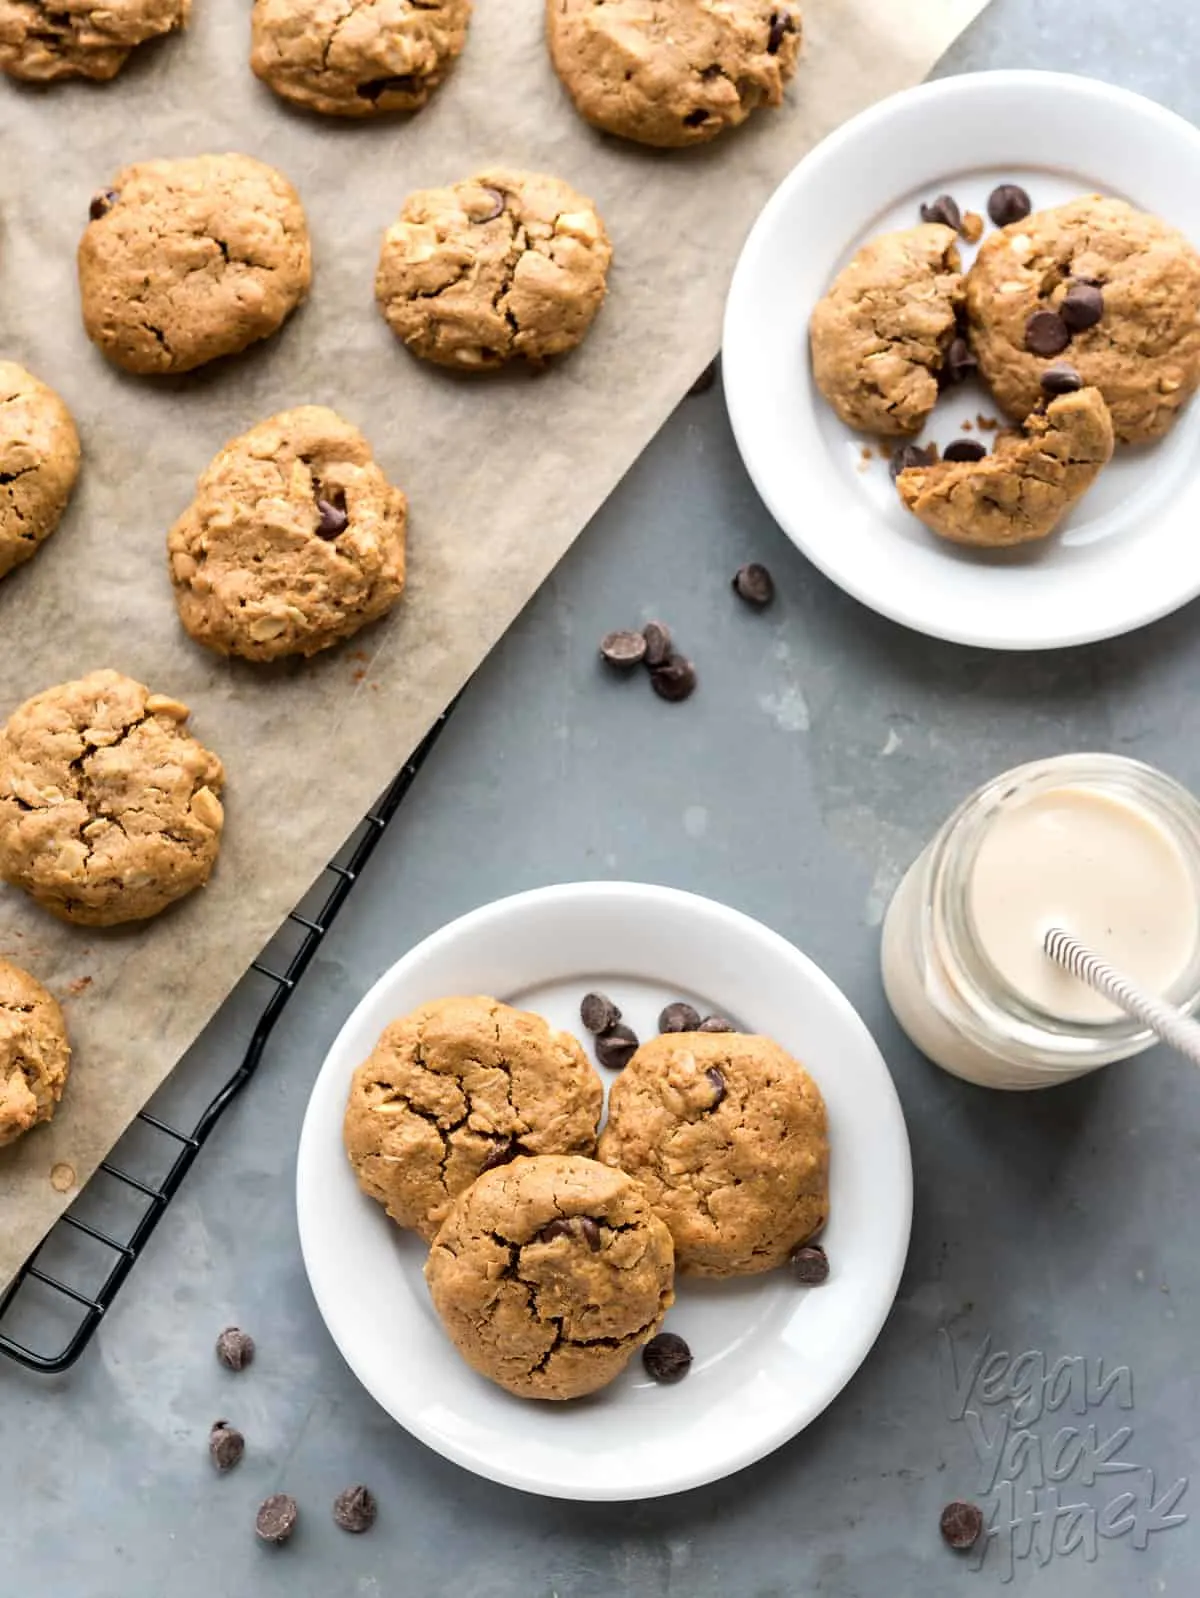 These Peanut Butter Oatmeal Cookies are easy-to-make, fun to customize, and always a crowd pleaser! From the book, But My Family Would Never Eat Vegan! #vegan #soyfree #eggfree